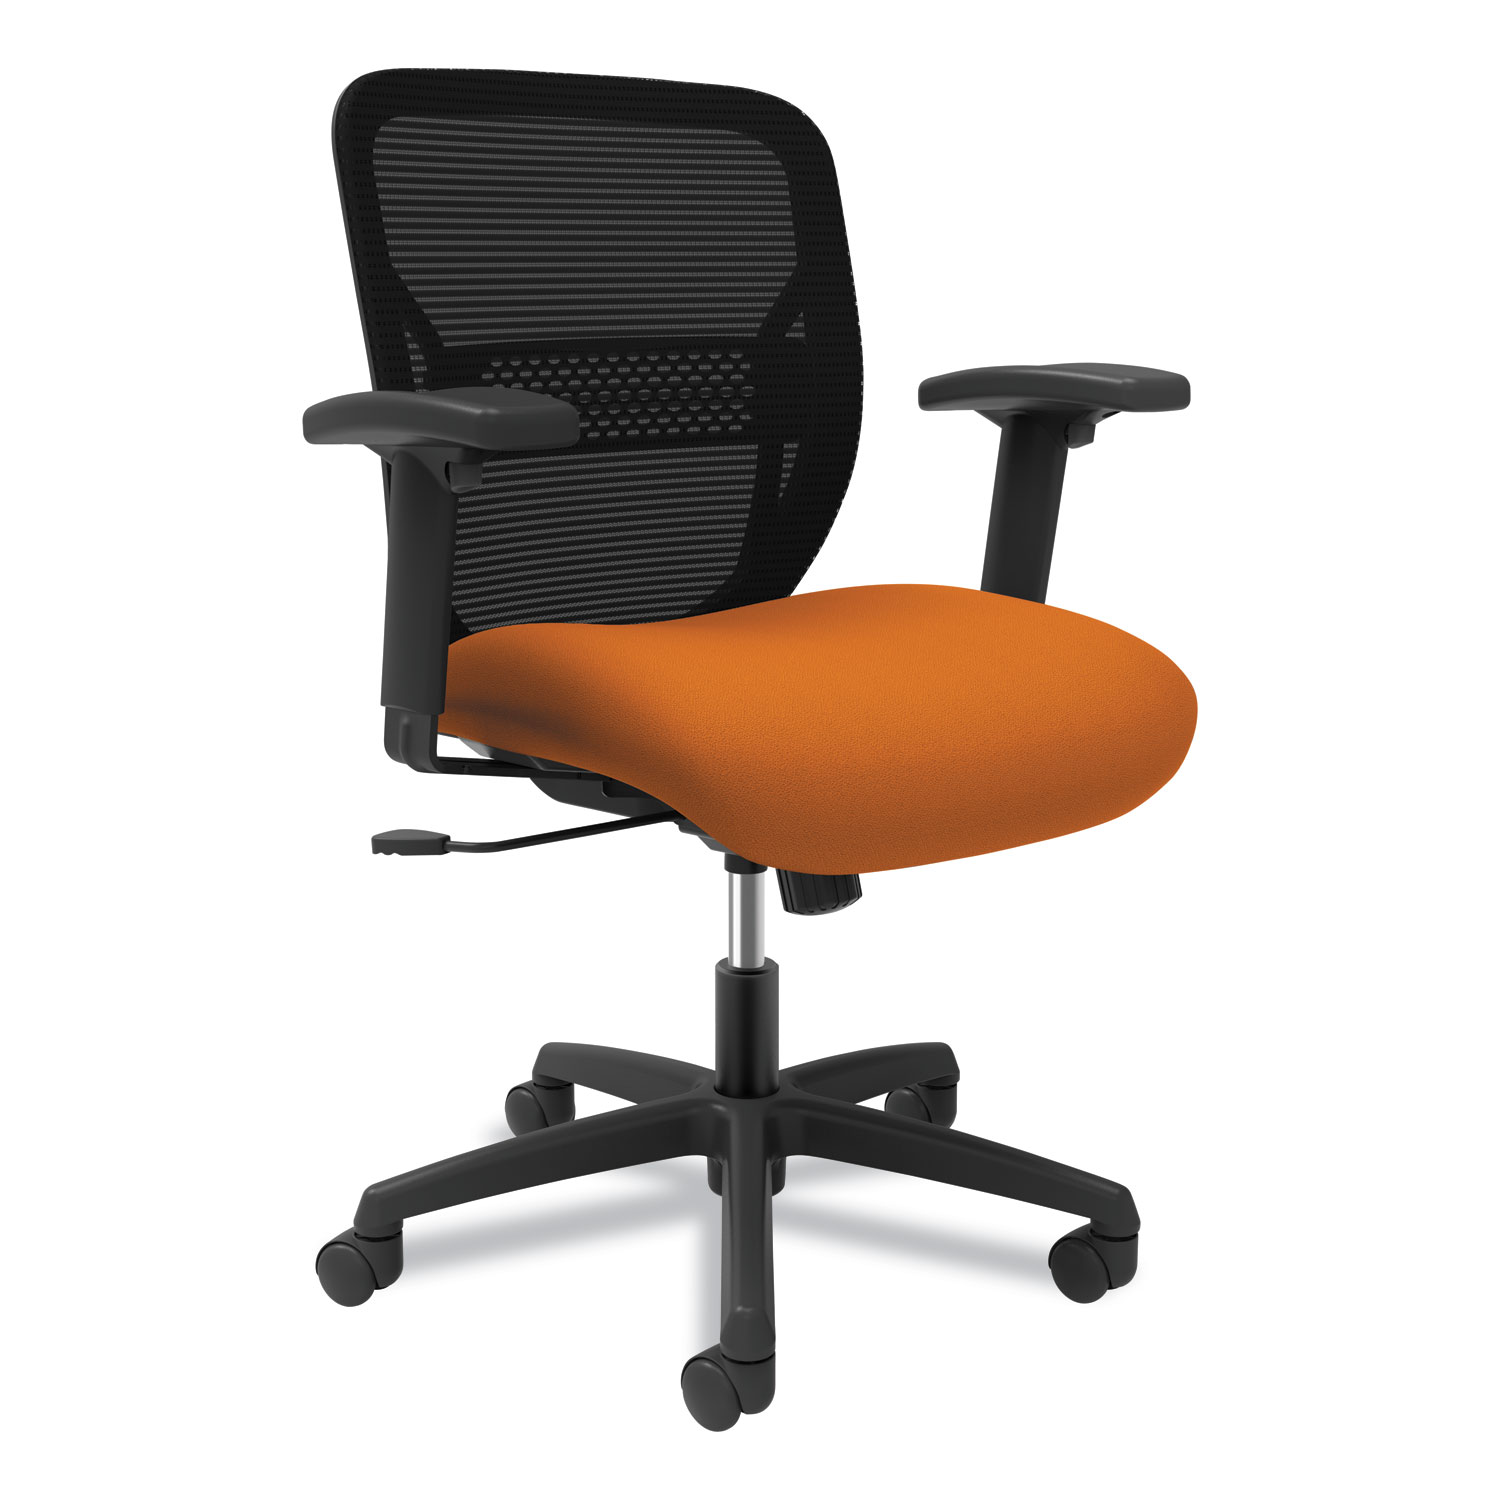  HON HONGTHMZ1CU47 Gateway Mid-Back Task Chair with Arms, Supports up to 250 lbs, Apricot Seat, Black Back, Black Base (HONGTHMZ1CU47) 